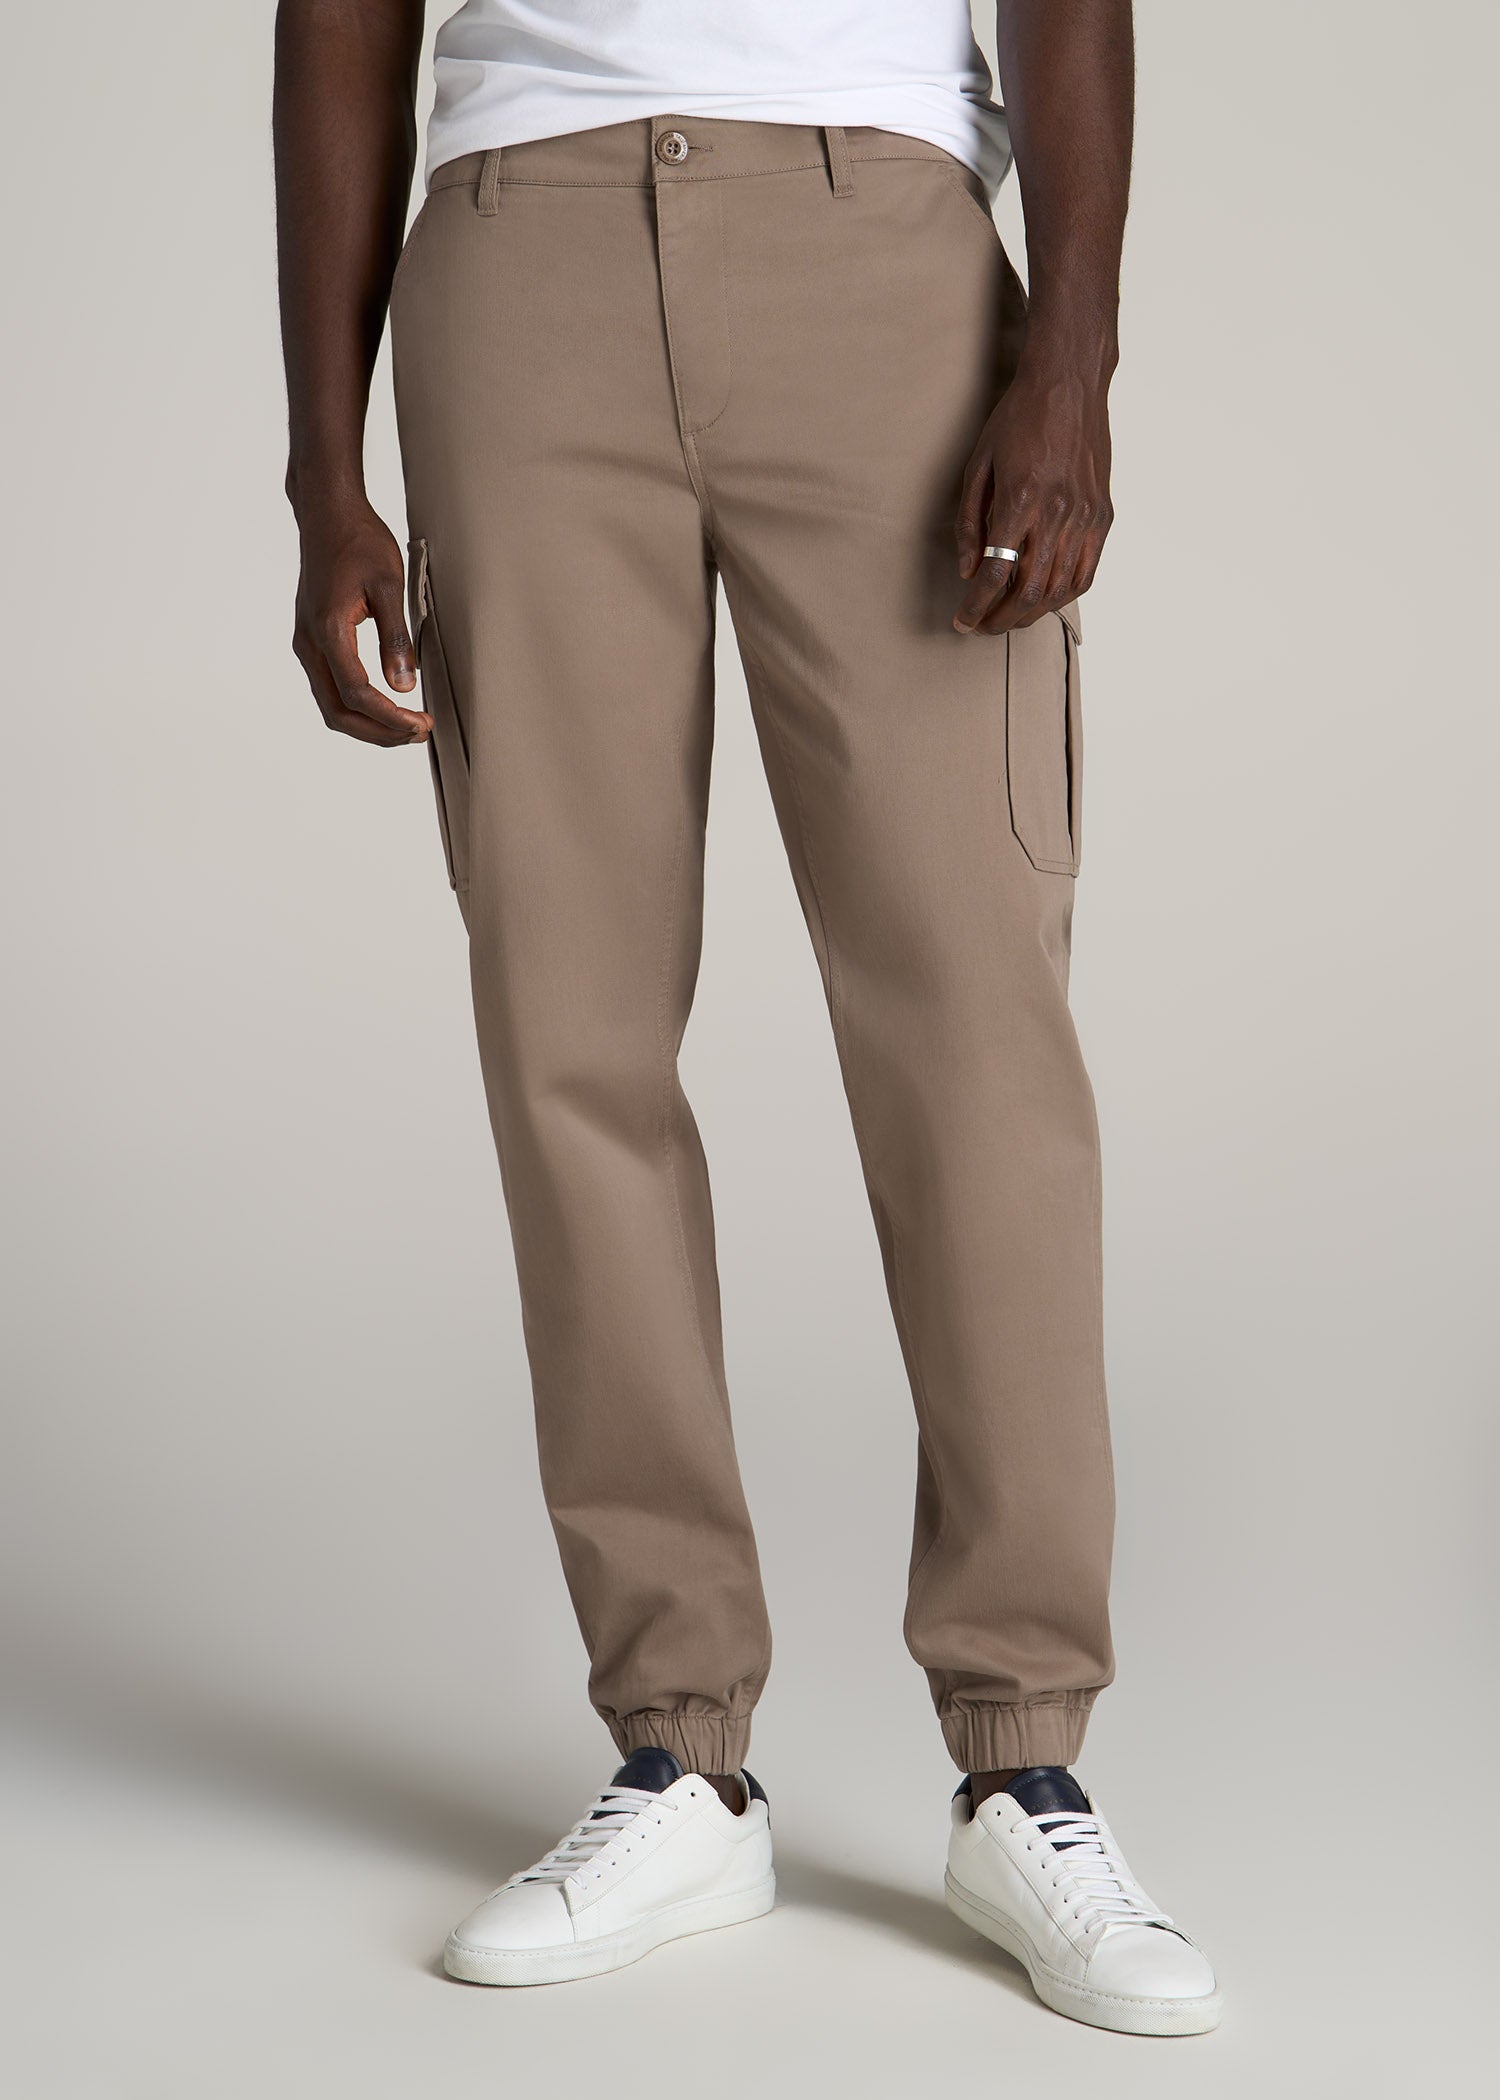 Chocolate Brown Pocket Thigh Casual Sweatpants